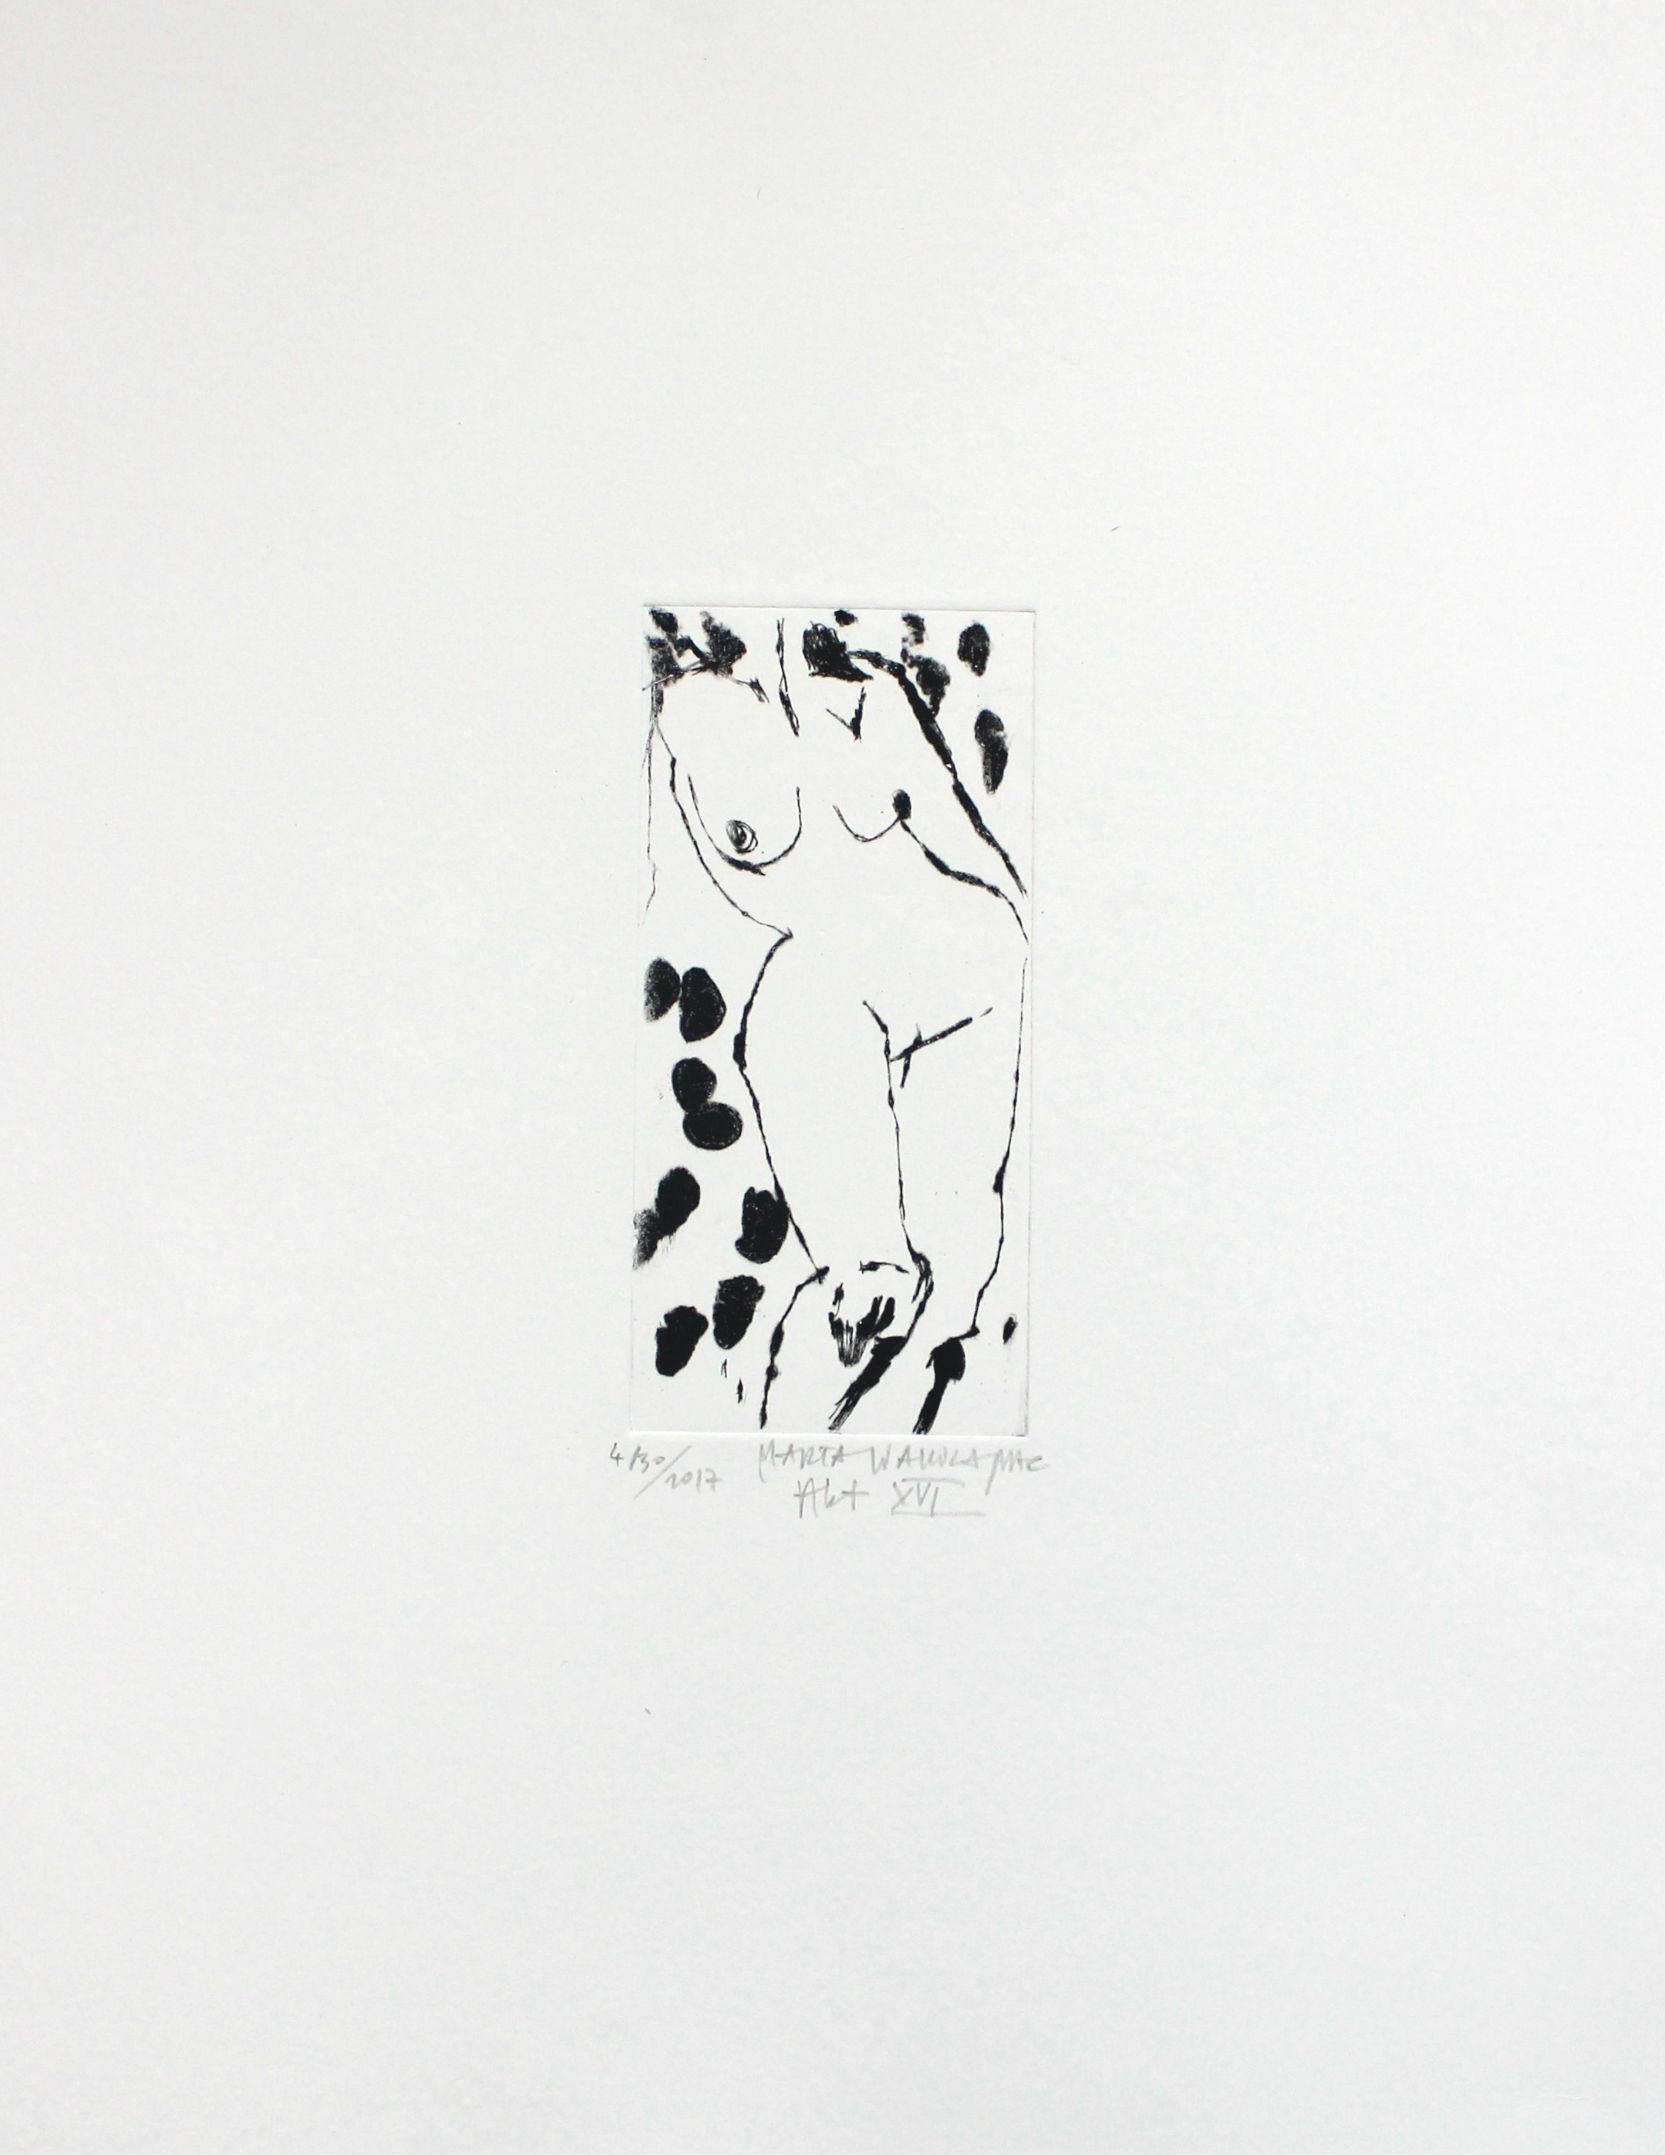 Drypoint etching print by Polish artist Marta Wakula-Mac, number 4 out of 30